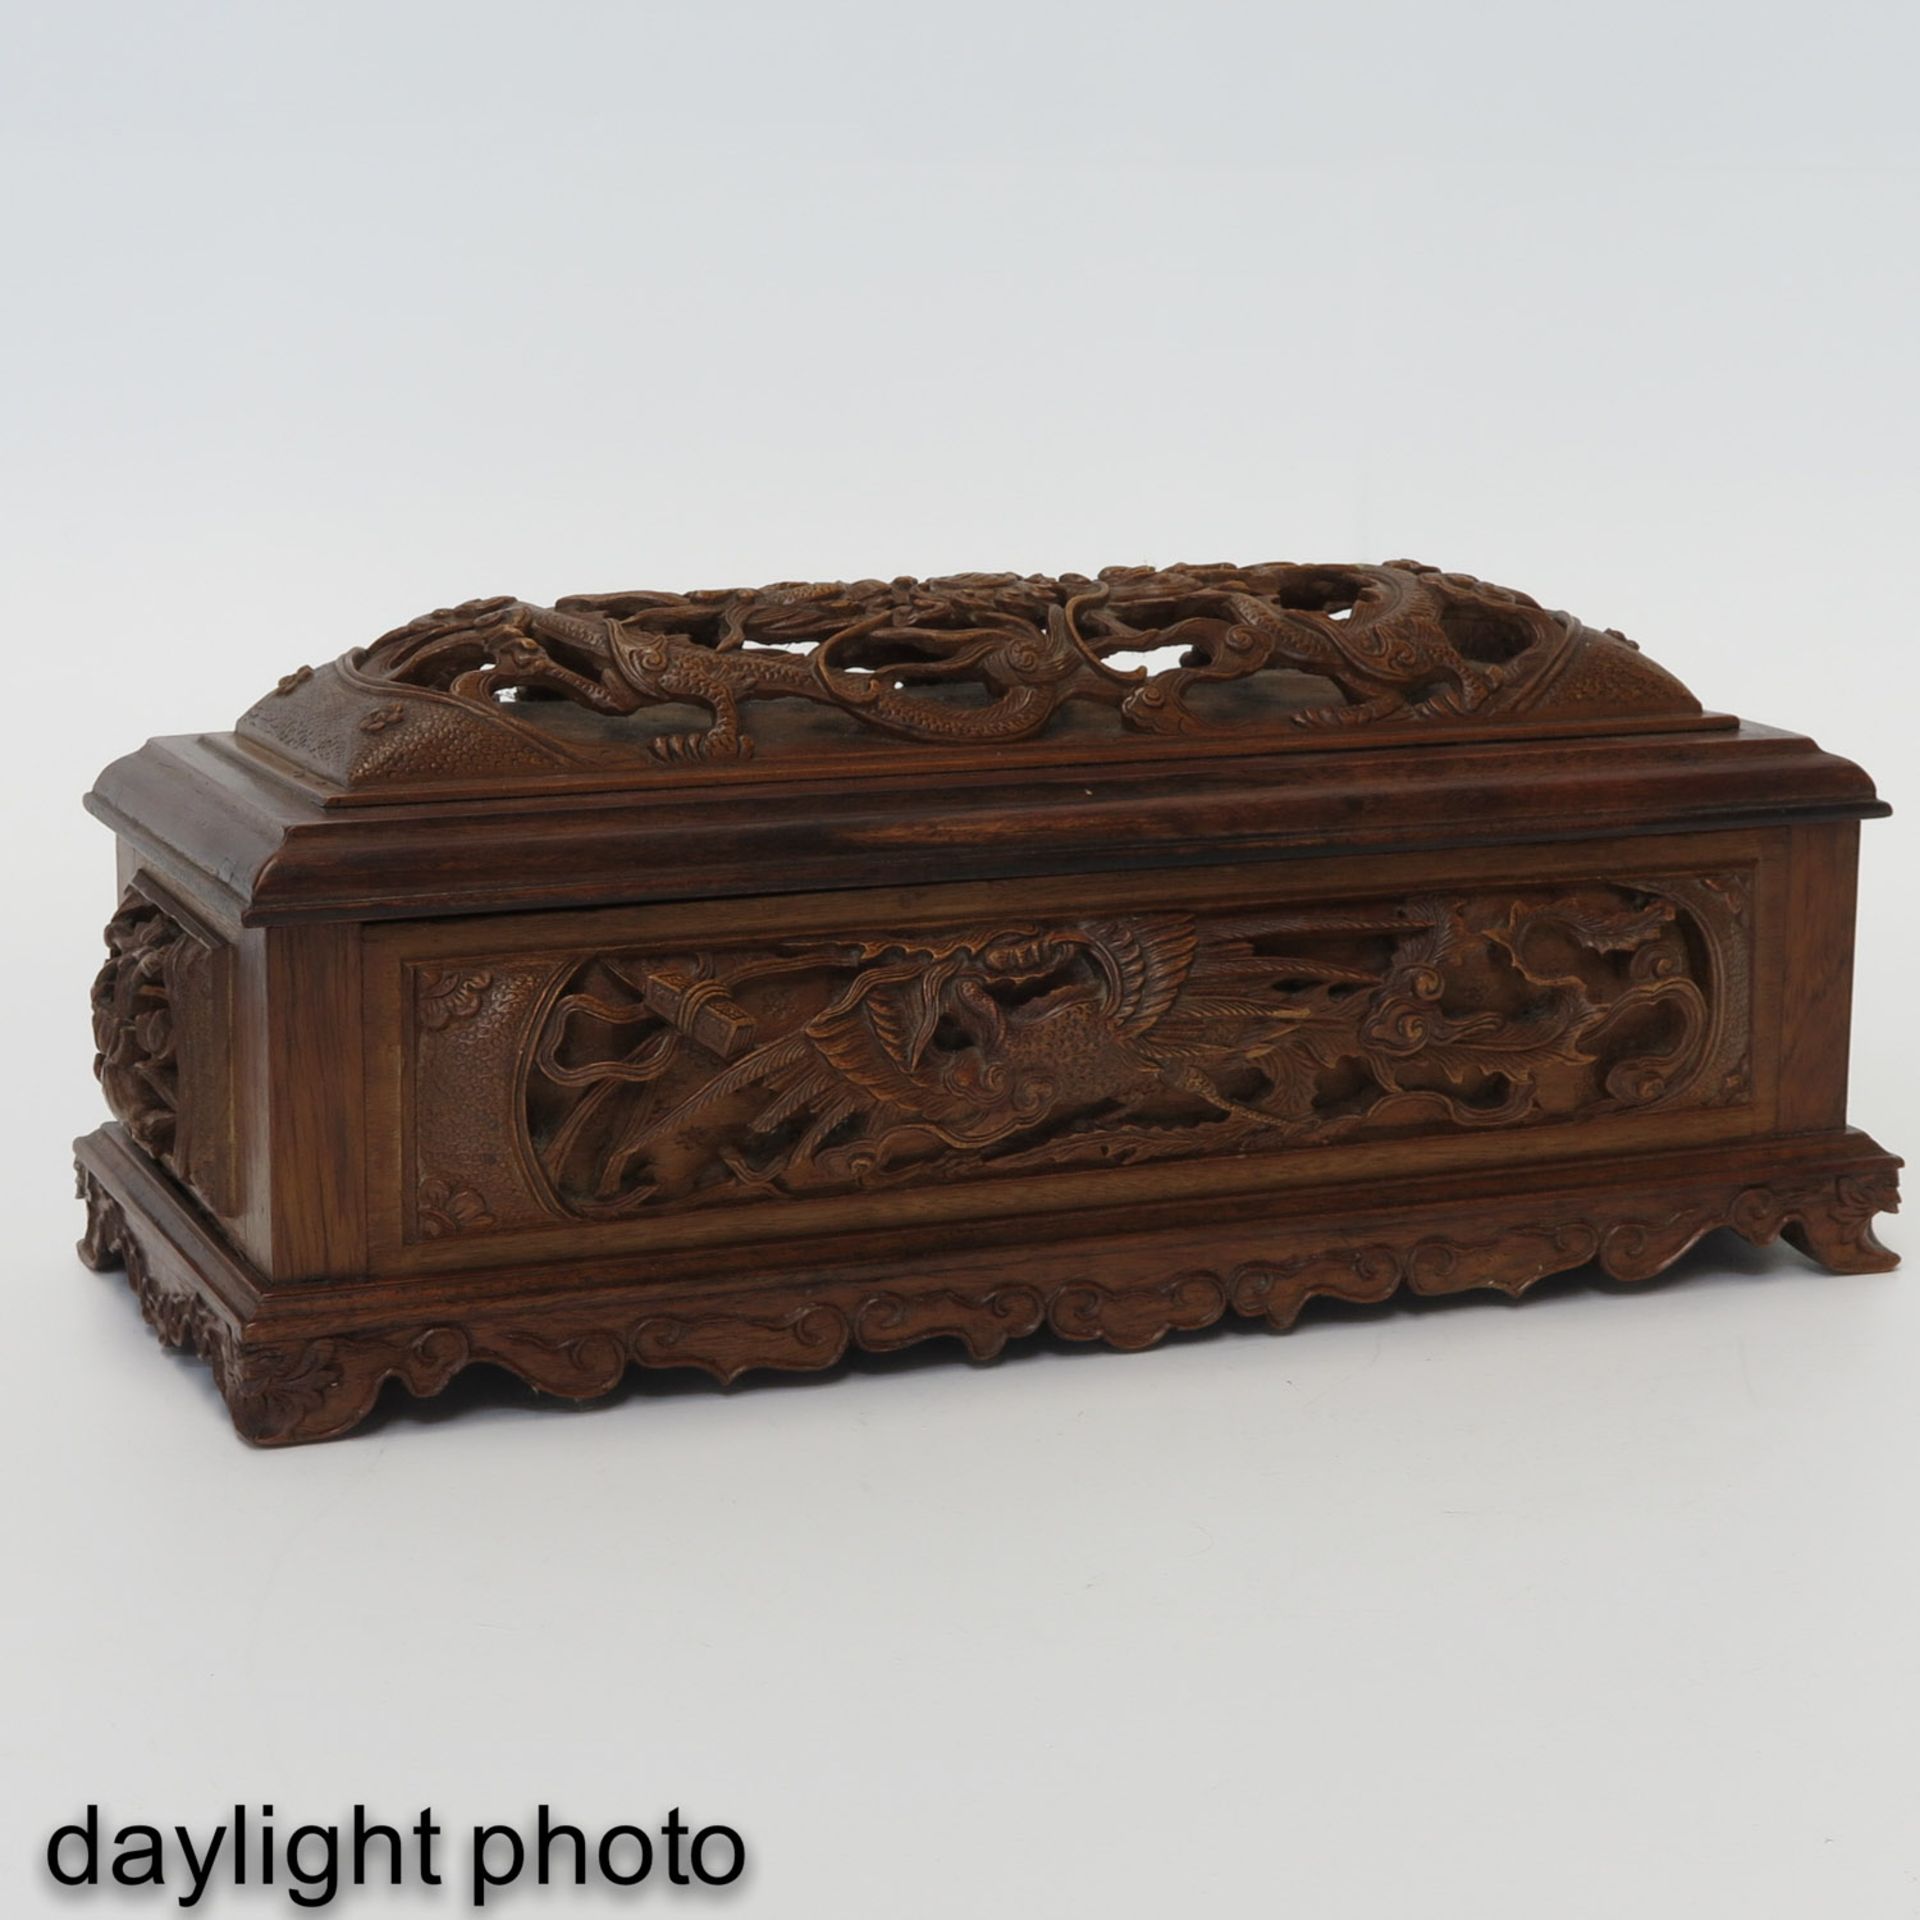 A Carved Wood Box - Image 7 of 10